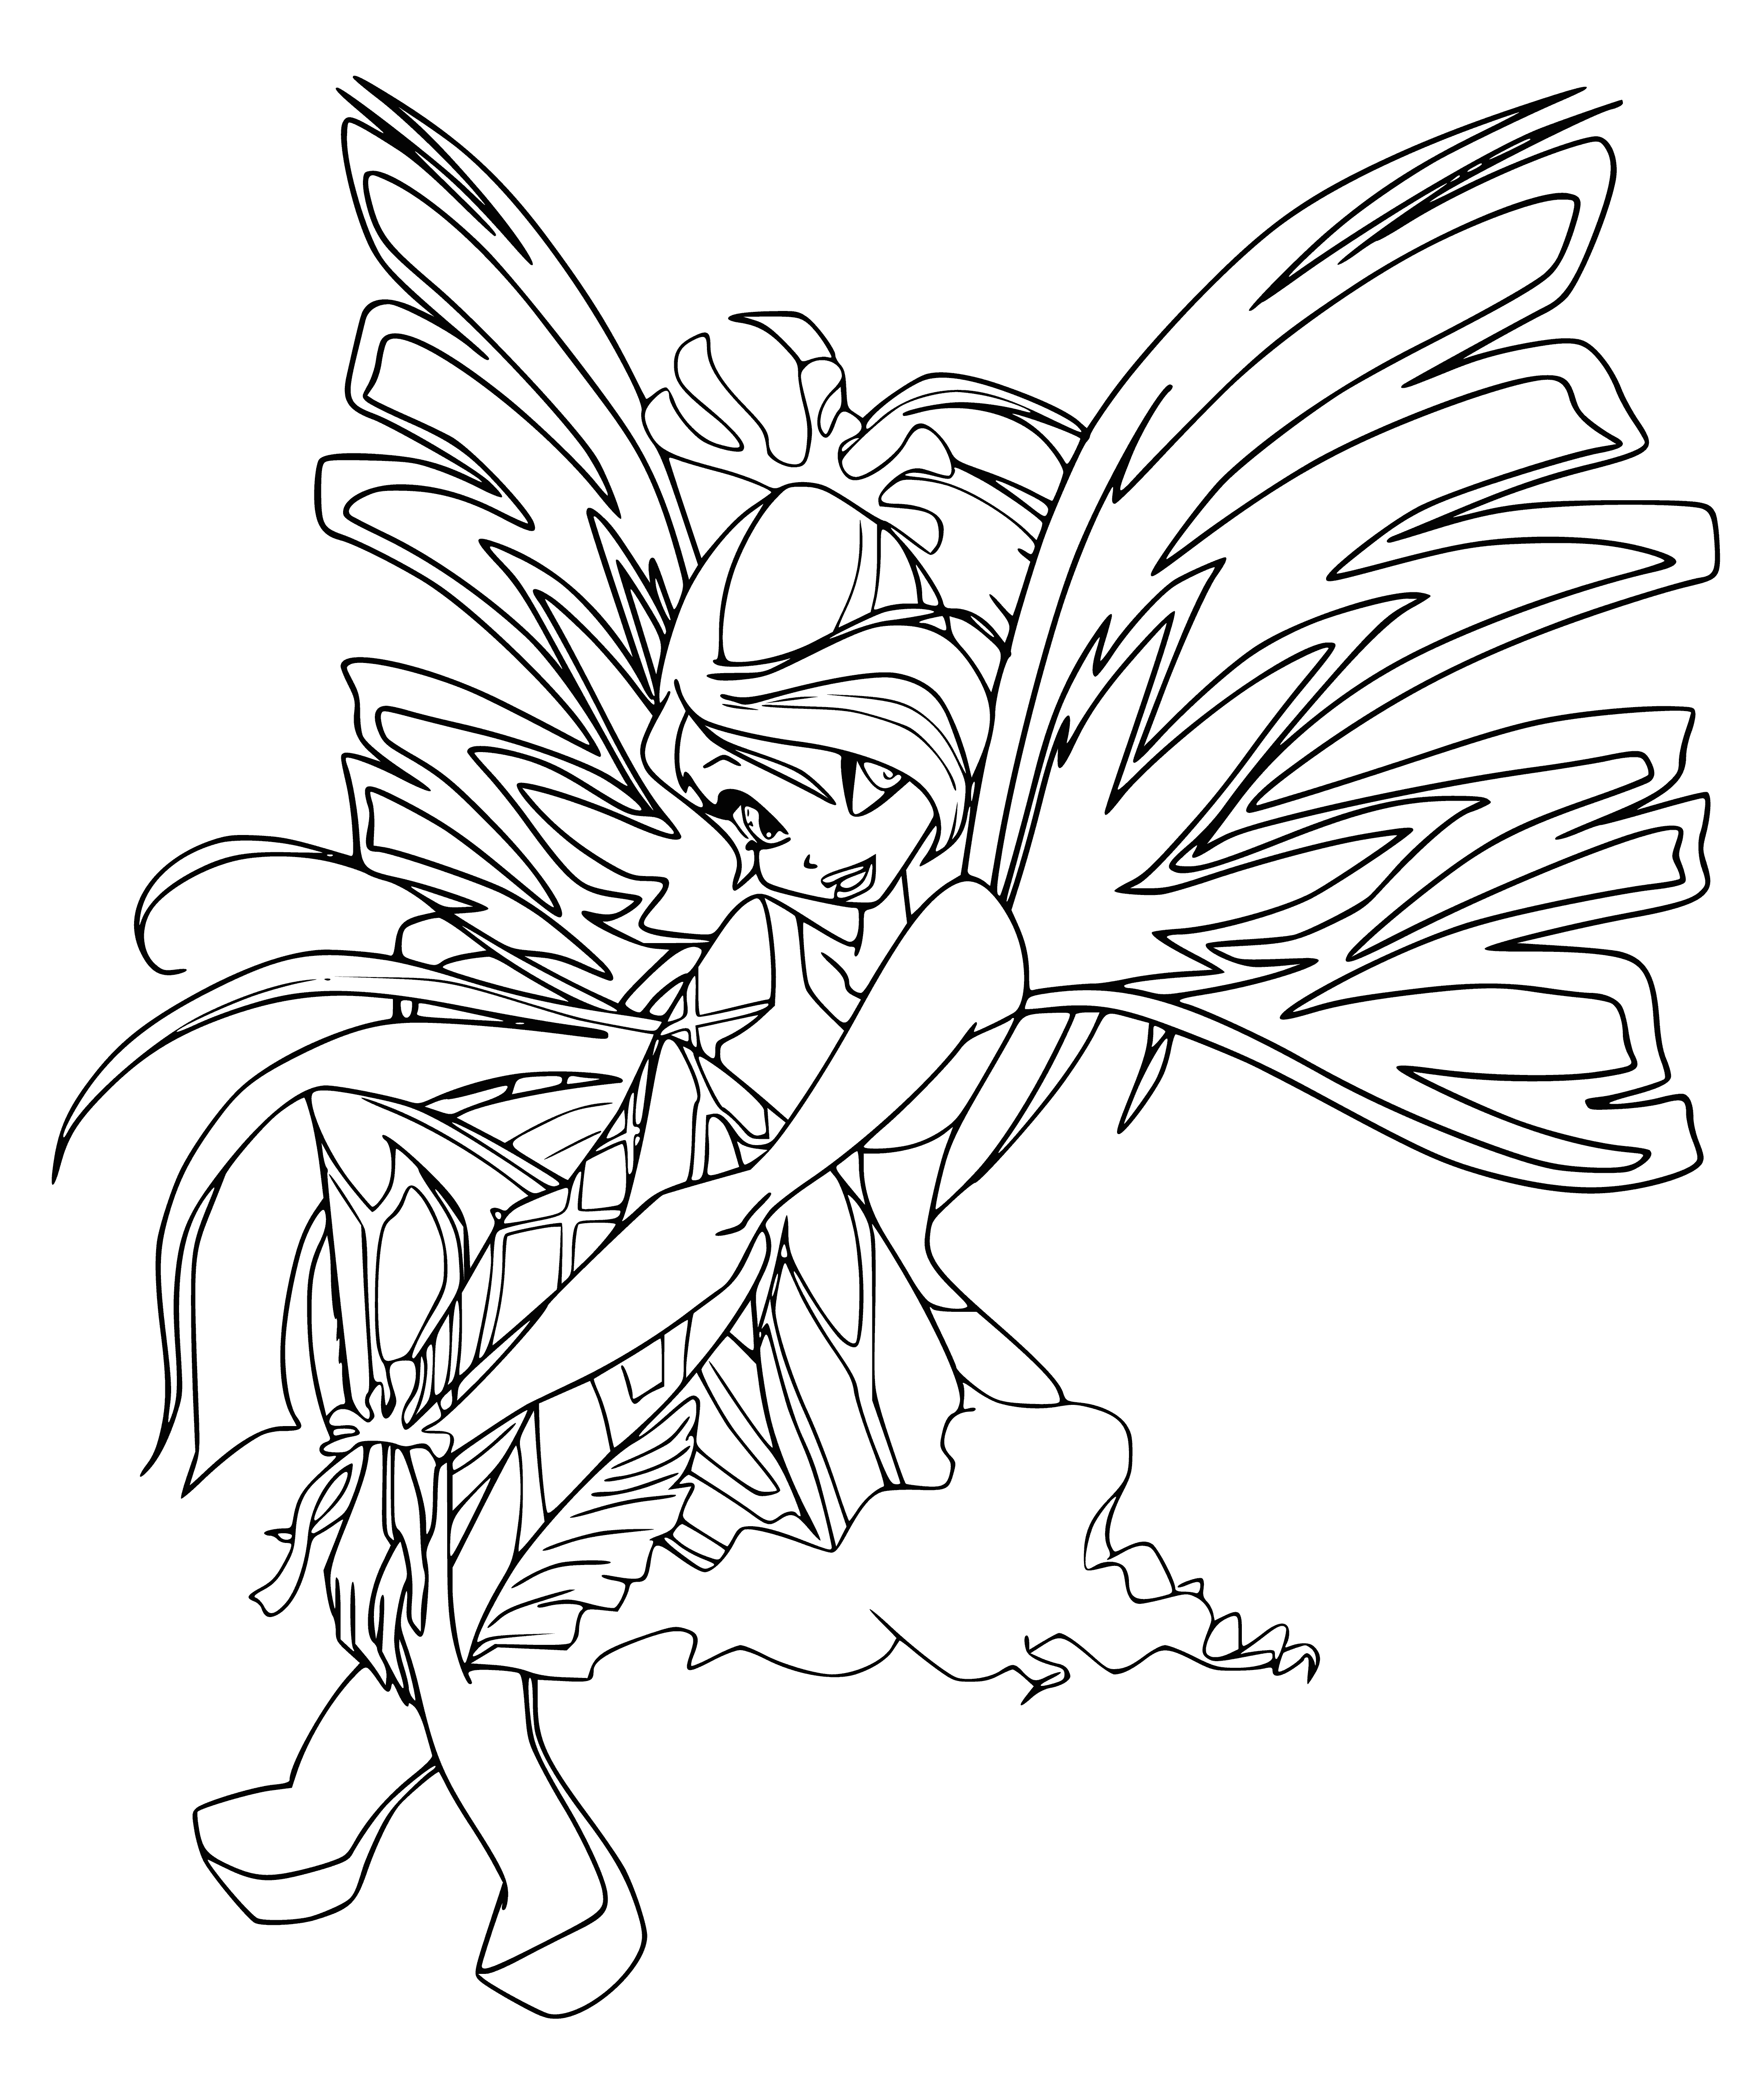 coloring page: Sireniks is a beautiful Bloom: long, curly hair, big blue eyes, long lashes, full pink lips, wearing a white dress with blue flowers.